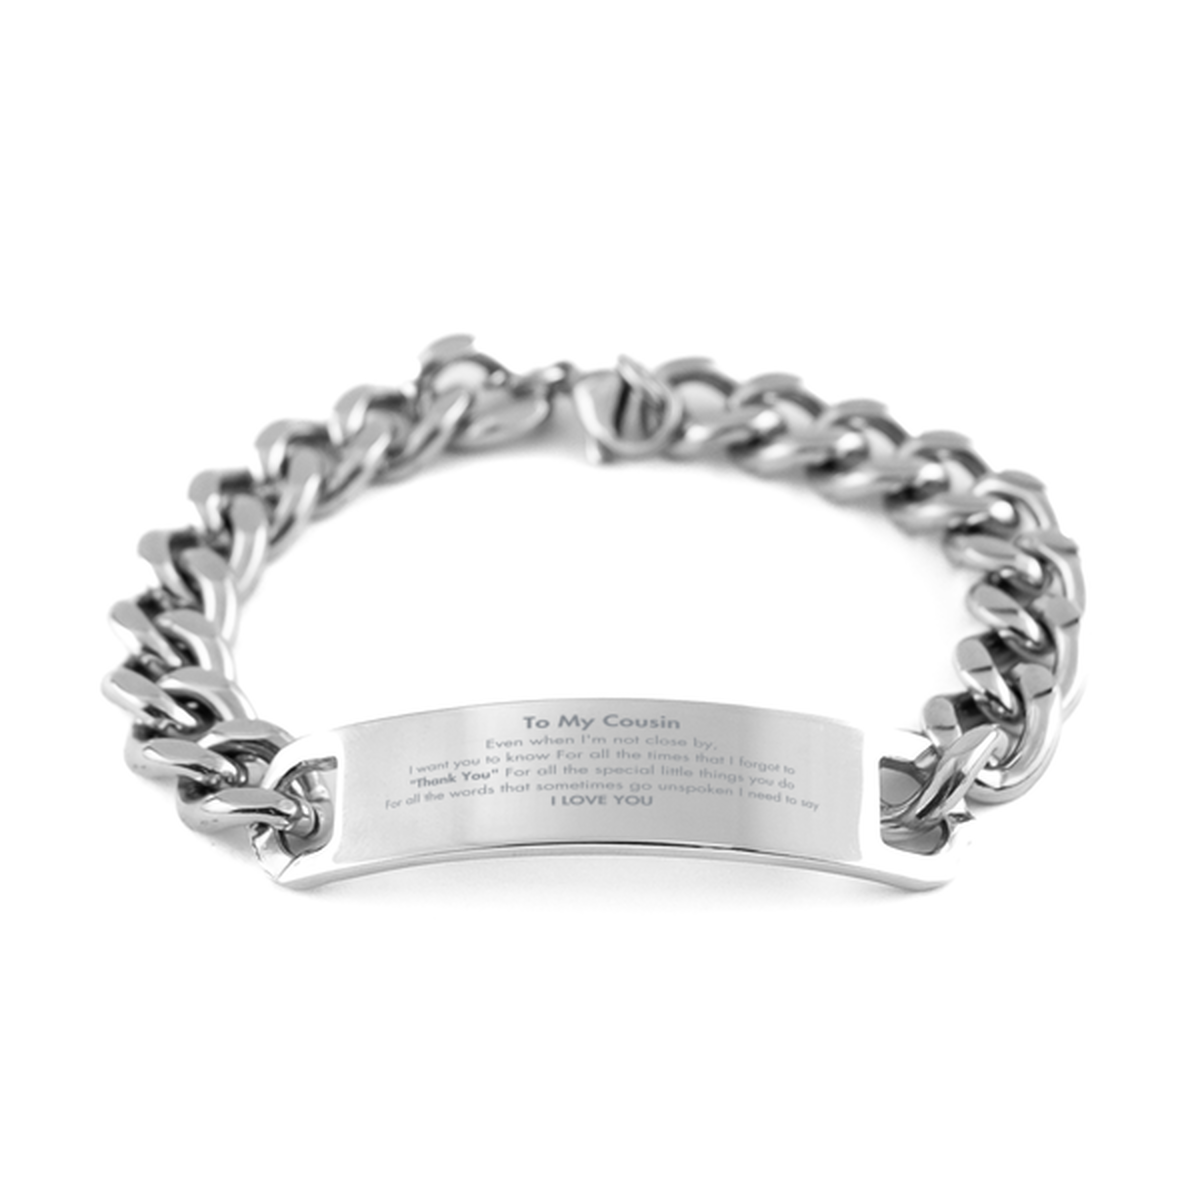 Thank You Gifts for Cousin, Keepsake Cuban Chain Stainless Steel Bracelet Gifts for Cousin Birthday Mother's day Father's Day Cousin For all the words That sometimes go unspoken I need to say I LOVE YOU